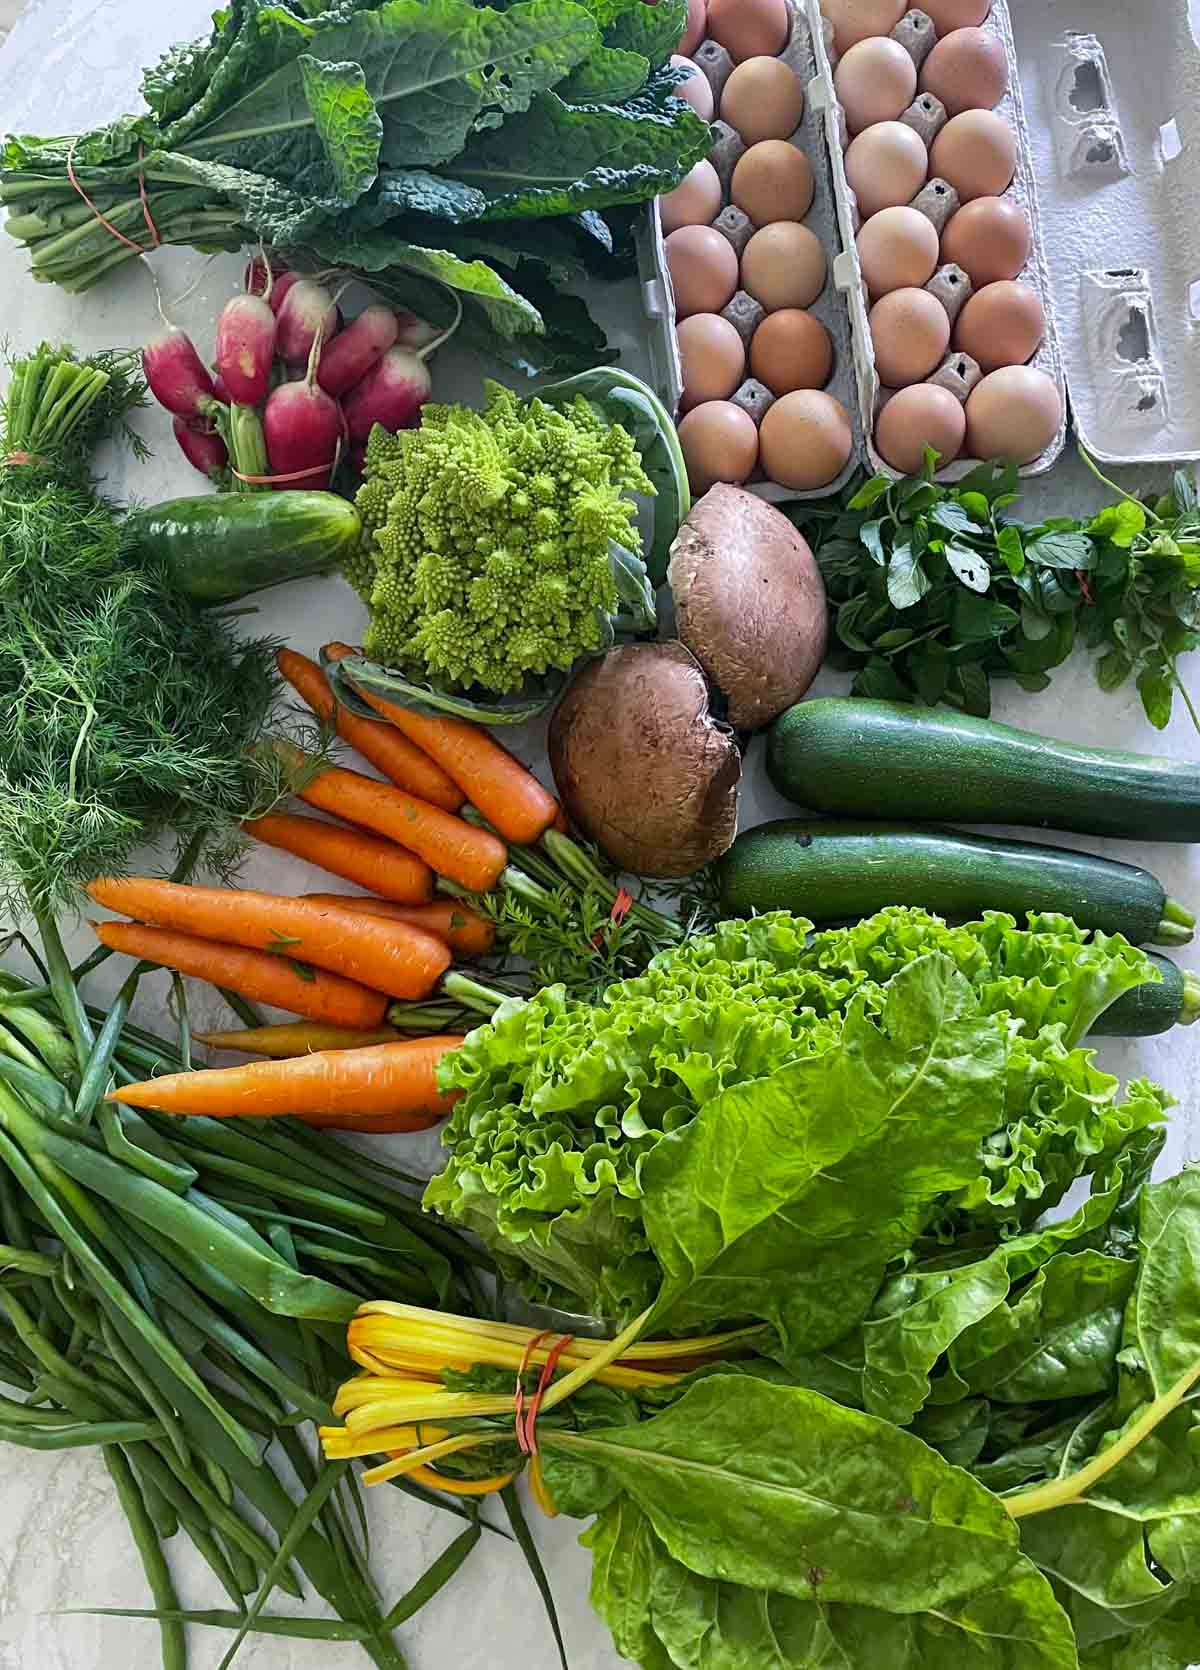 Food to create farm-to-table meals